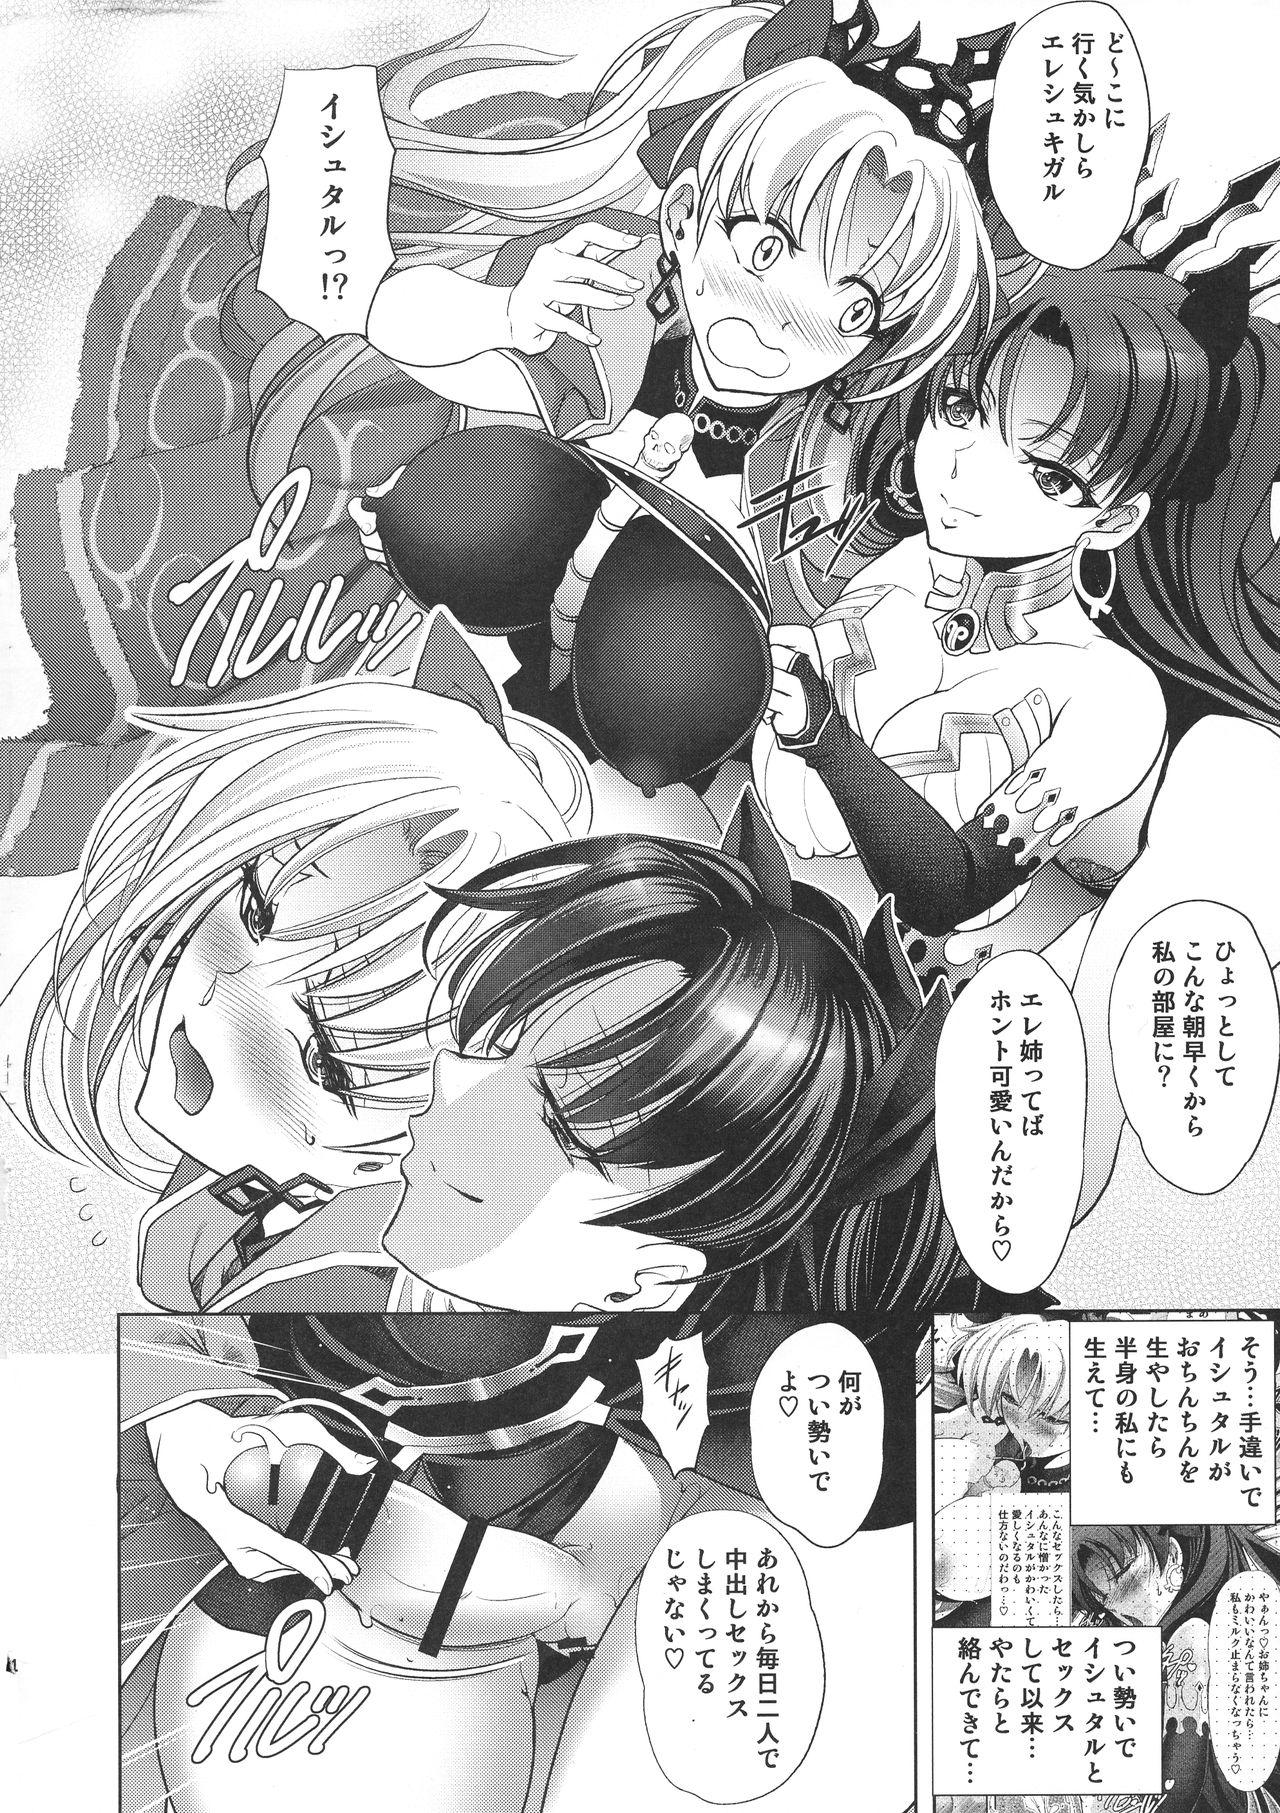 Female Orgasm COMMAND CODE - Fate grand order Blow - Page 3